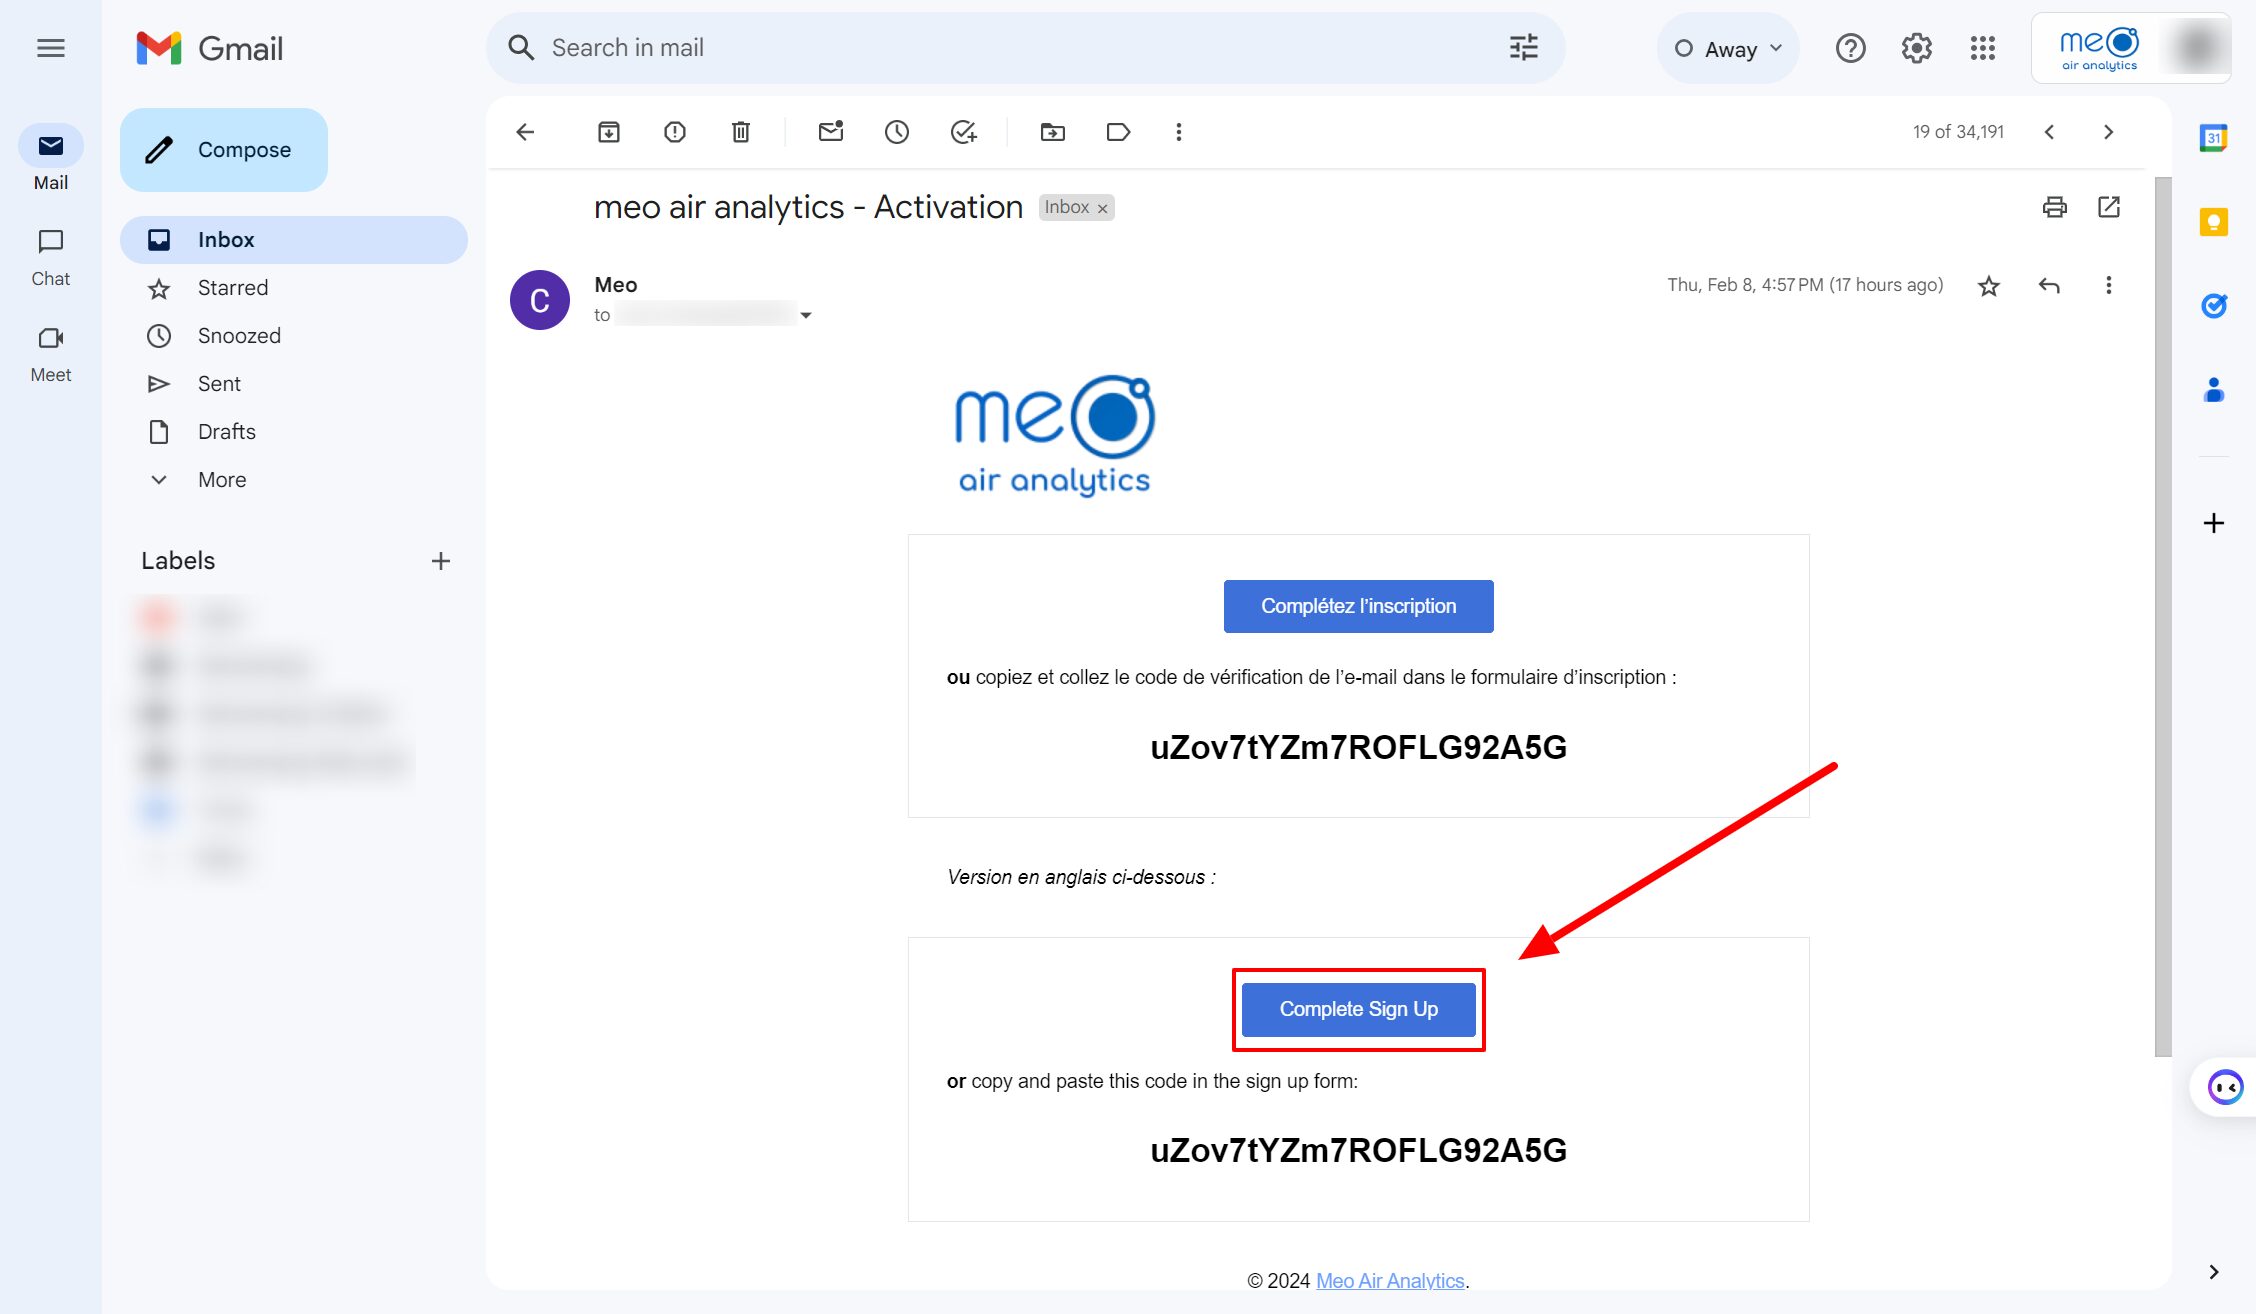 4. Check new email from meo, and click on “Complete Sign Up”